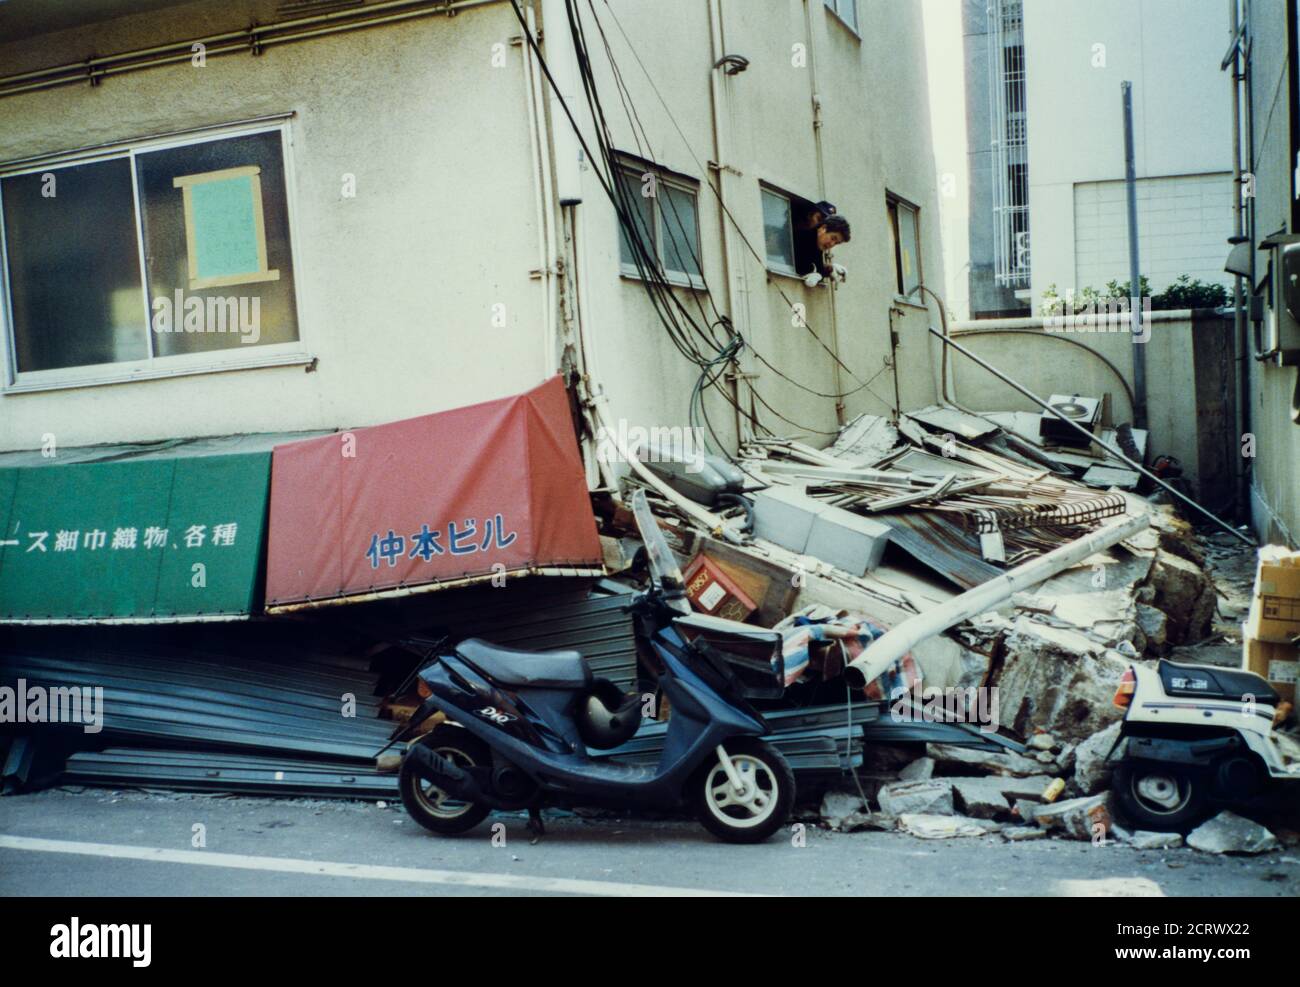 Man looks out of window of collapsed building damaged from the 1995 Great Hanshin Earthquake in Kobe, Japan Stock Photo